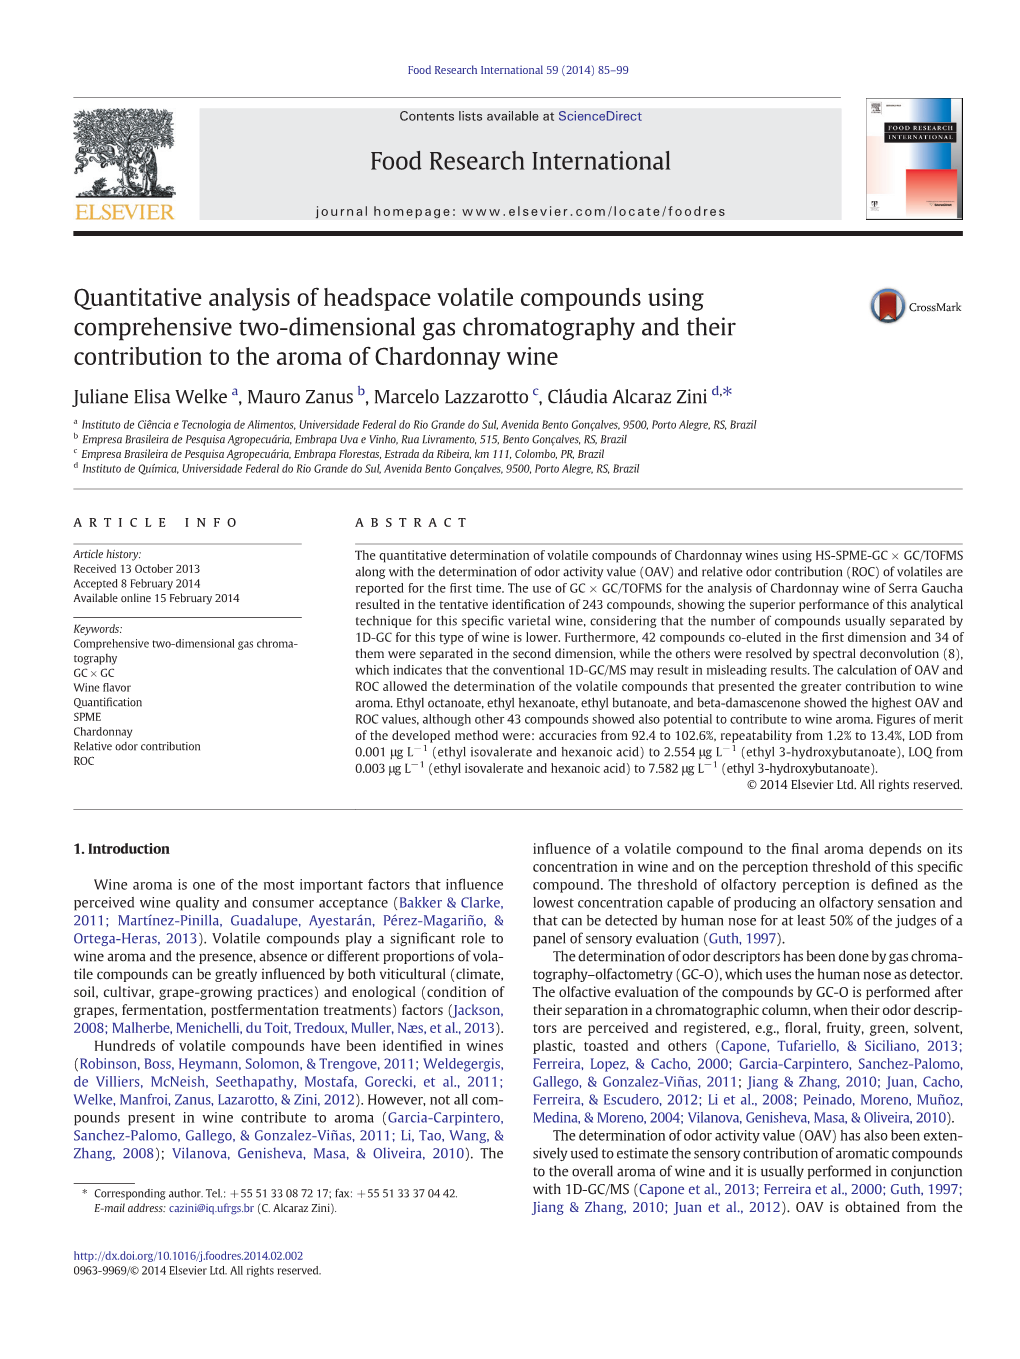 Quantitative Analysis of Headspace Volatile Compounds Using Comprehensive Two-Dimensional Gas Chromatography and Their Contribution to the Aroma of Chardonnay Wine